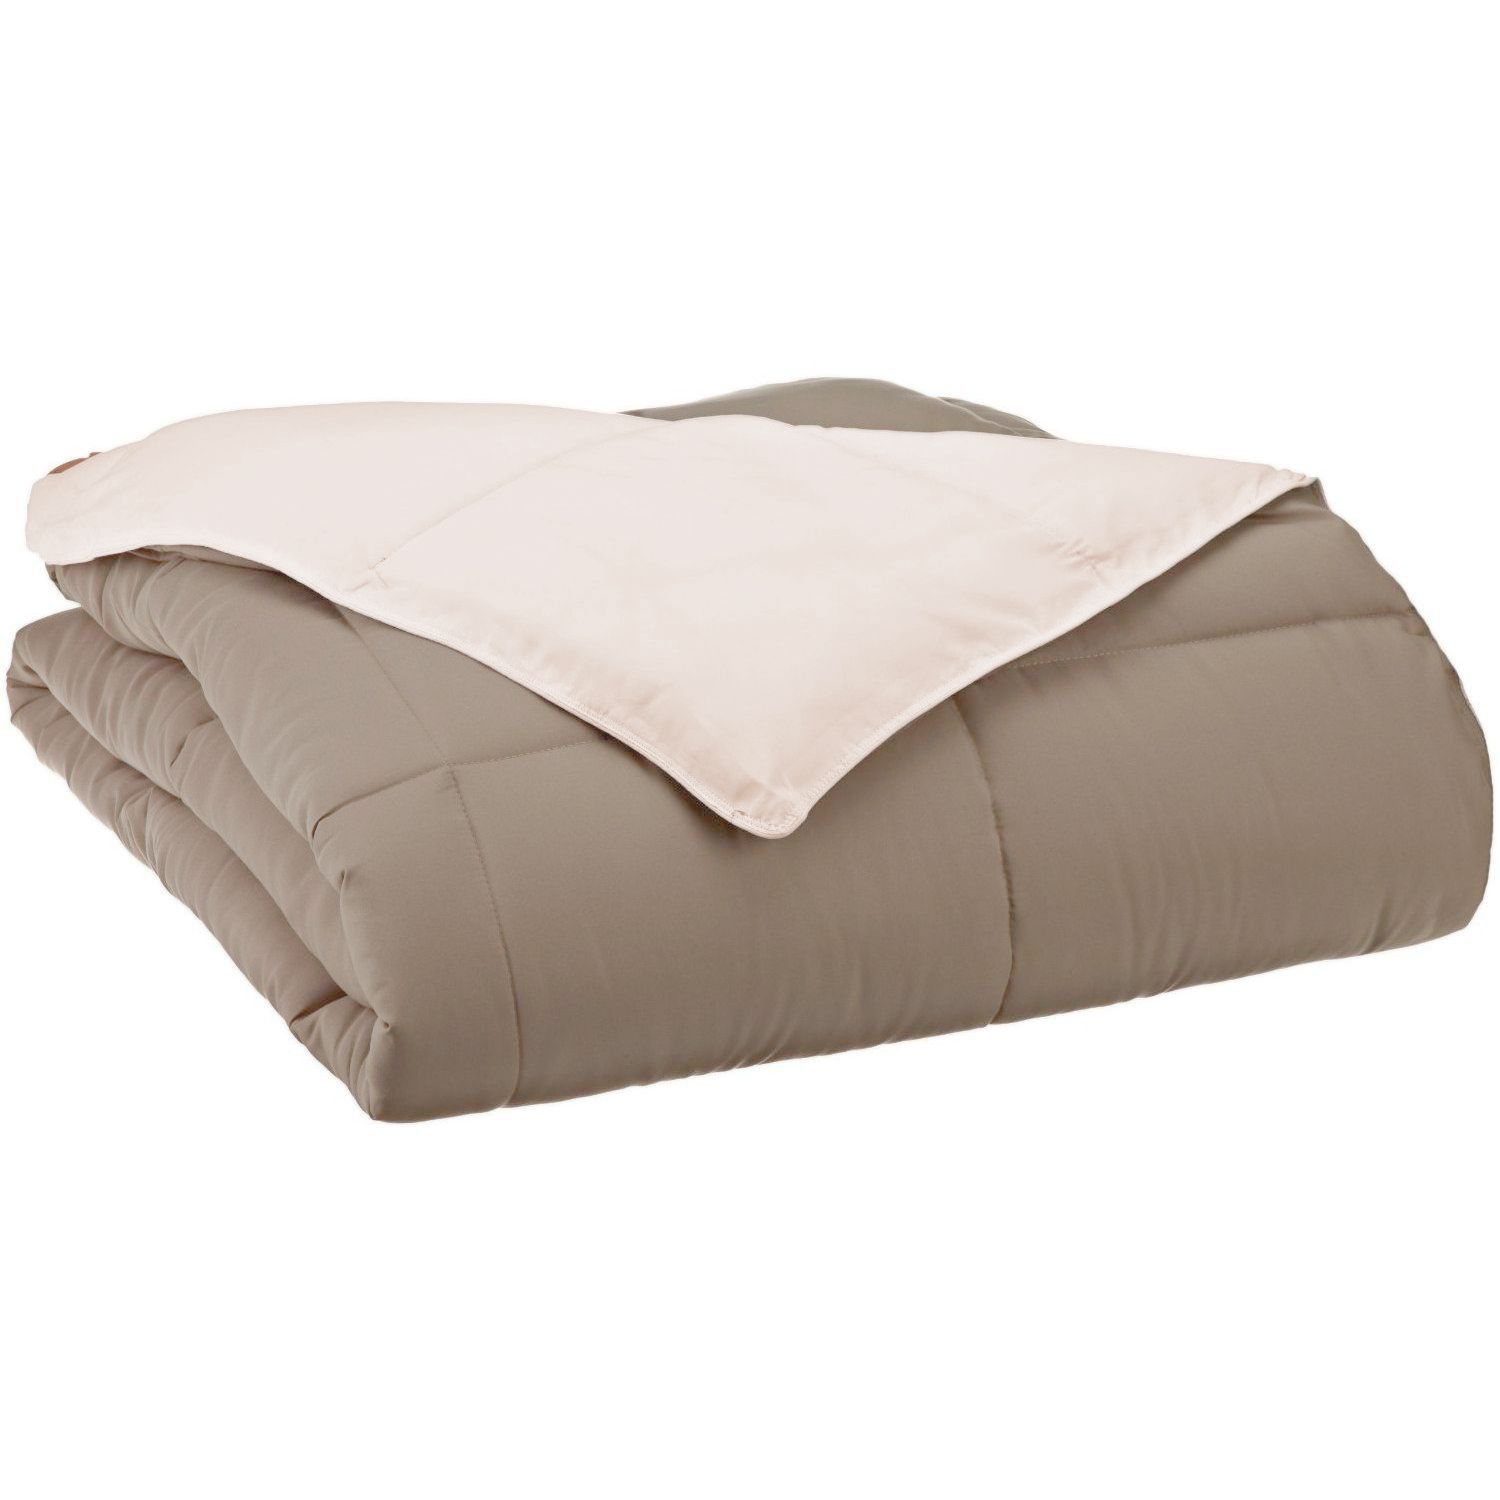 Superior Down Alternative Reversible Comforter, Twin/ Twin XL, Ivory/ Taupe - image 1 of 3